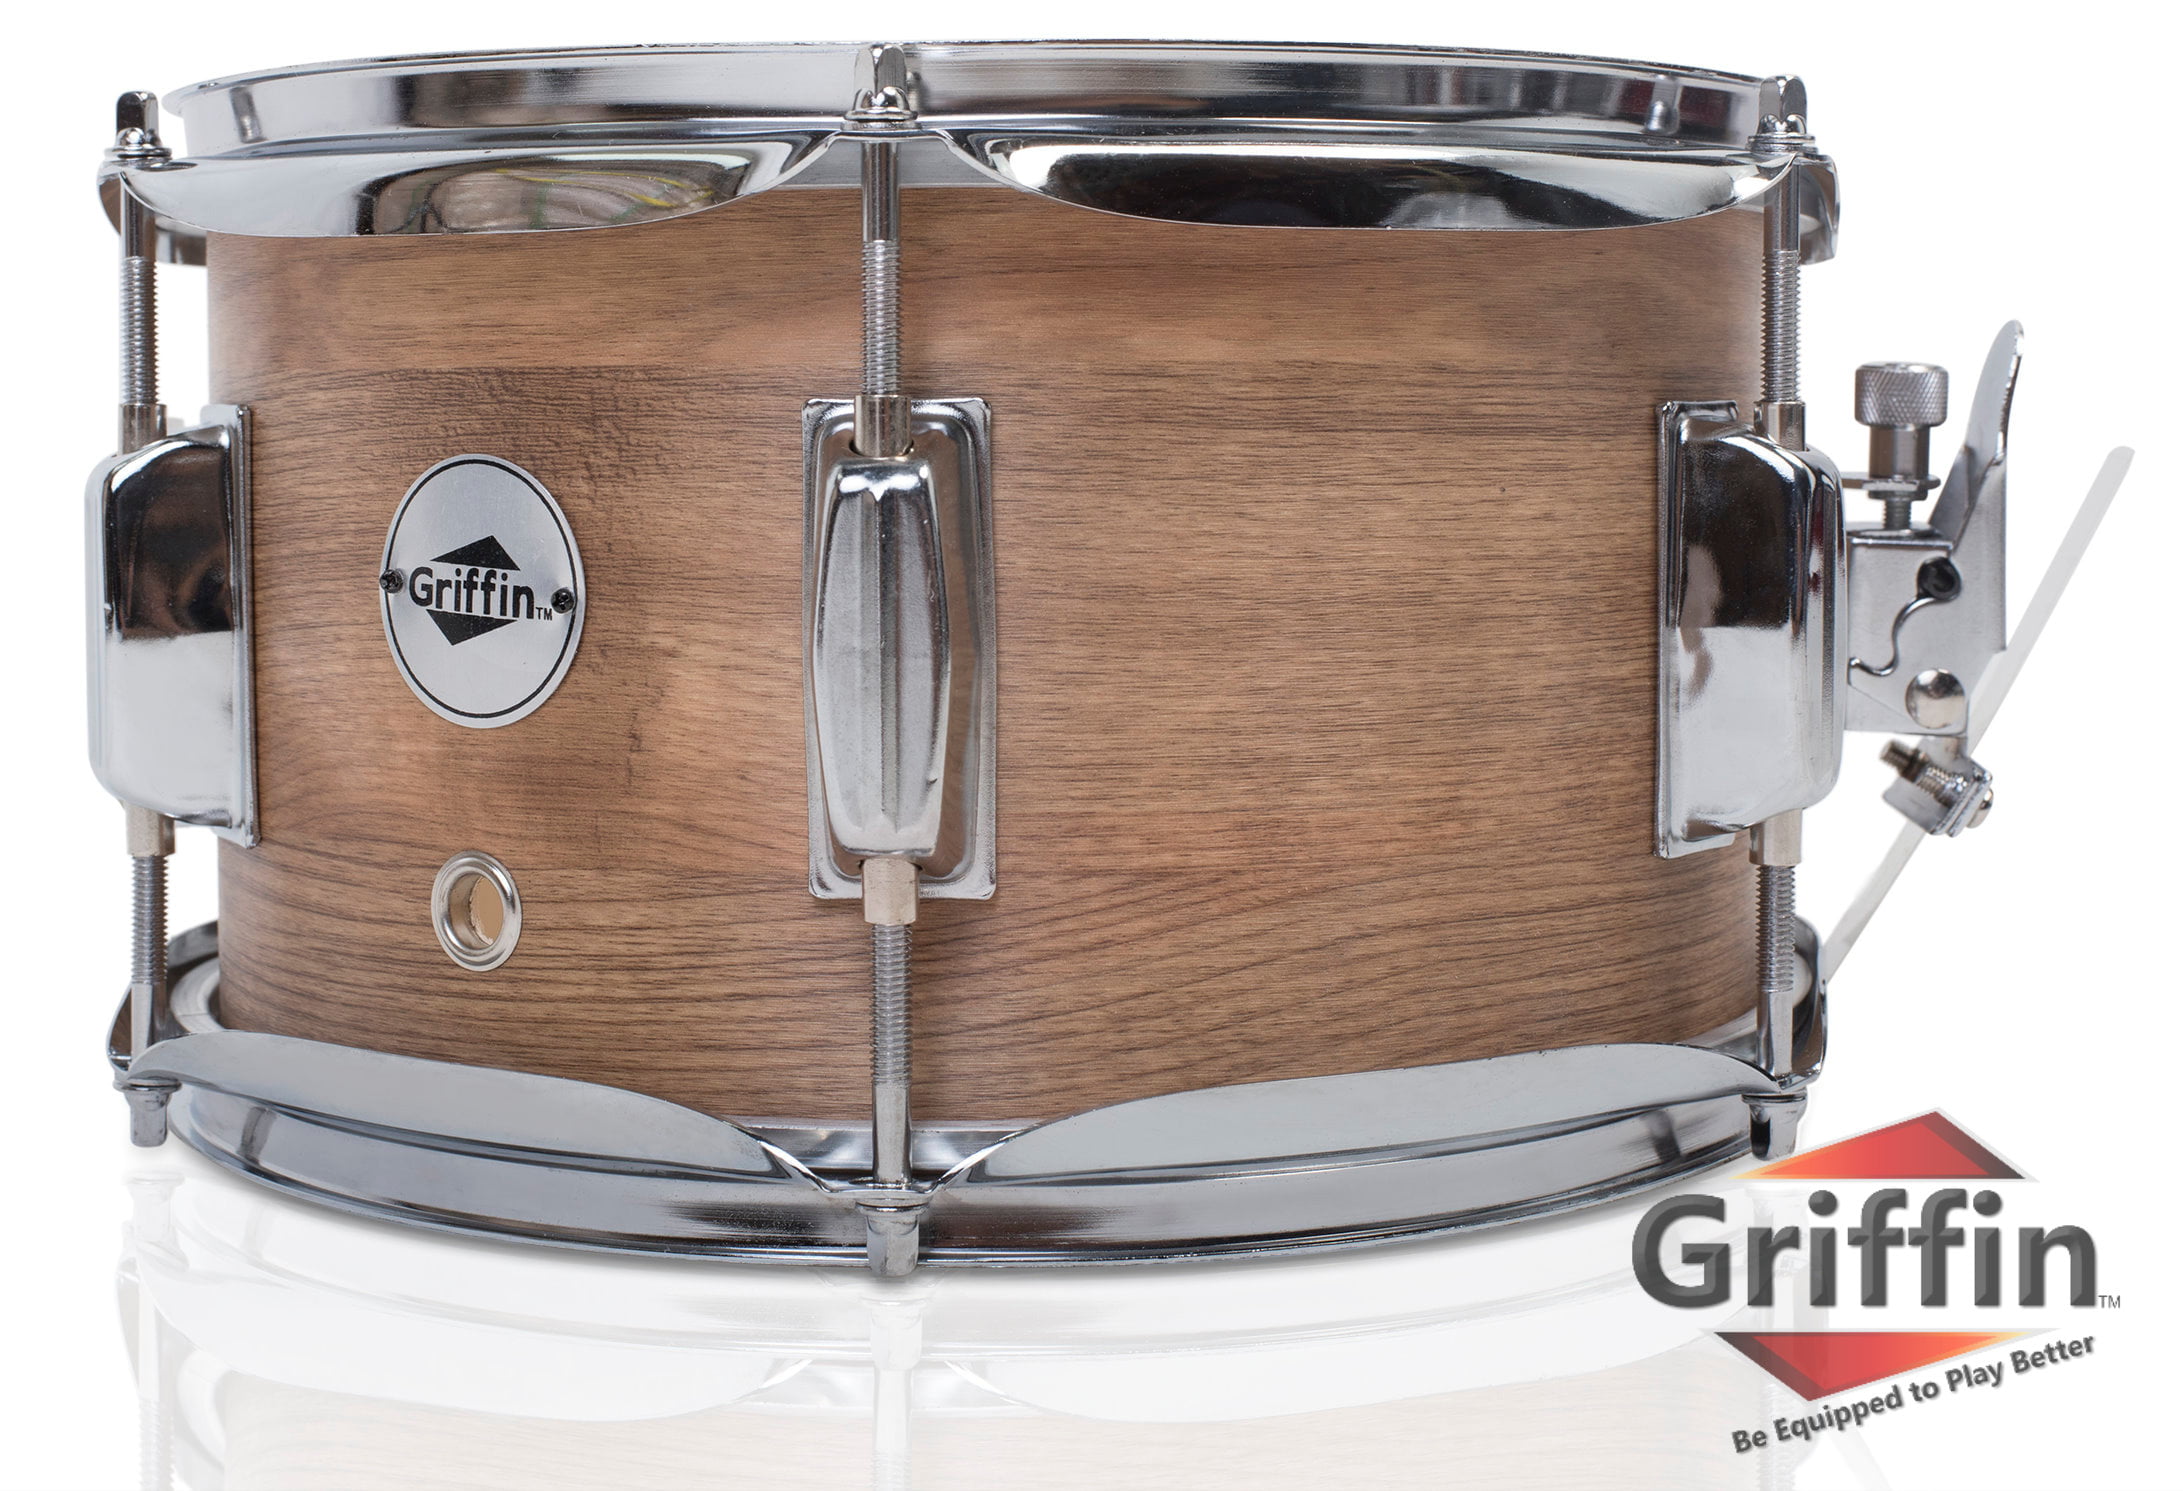 Popcorn Snare Drum by Griffin|Soprano Firecracker 10 x 6 Poplar Wood Shell with Hickory PVC|Concert Percussion Musical Instrument with Drummers Key and Deluxe Snare Strainer|Beginner & Professional 